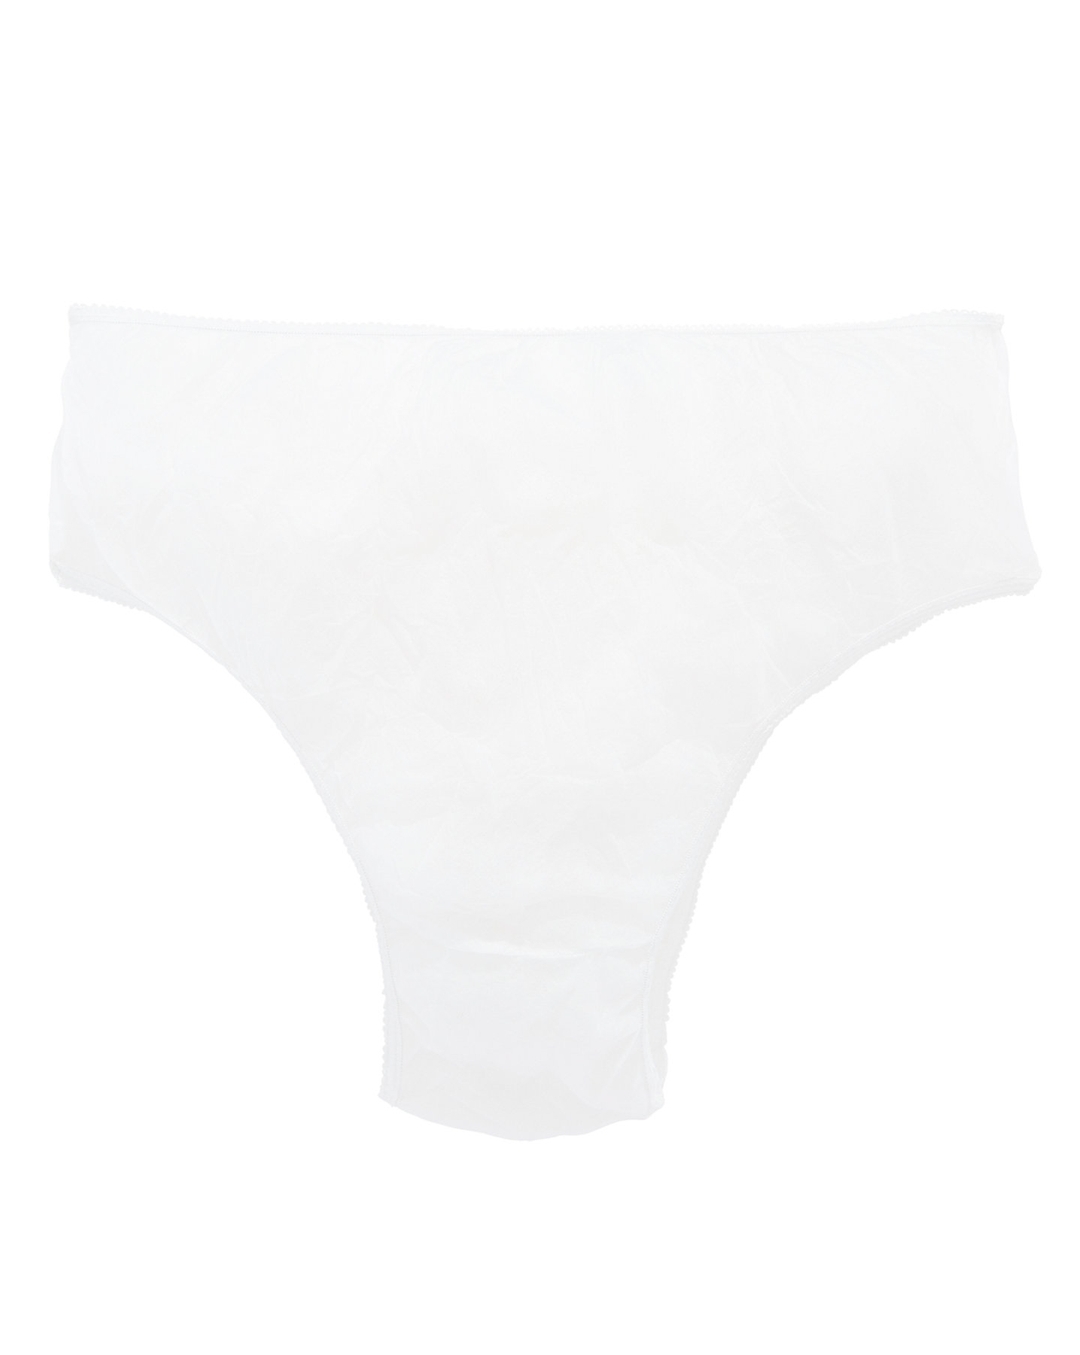 Buy Mothercare Disposable Maternity Briefs - 5 Pack Online in